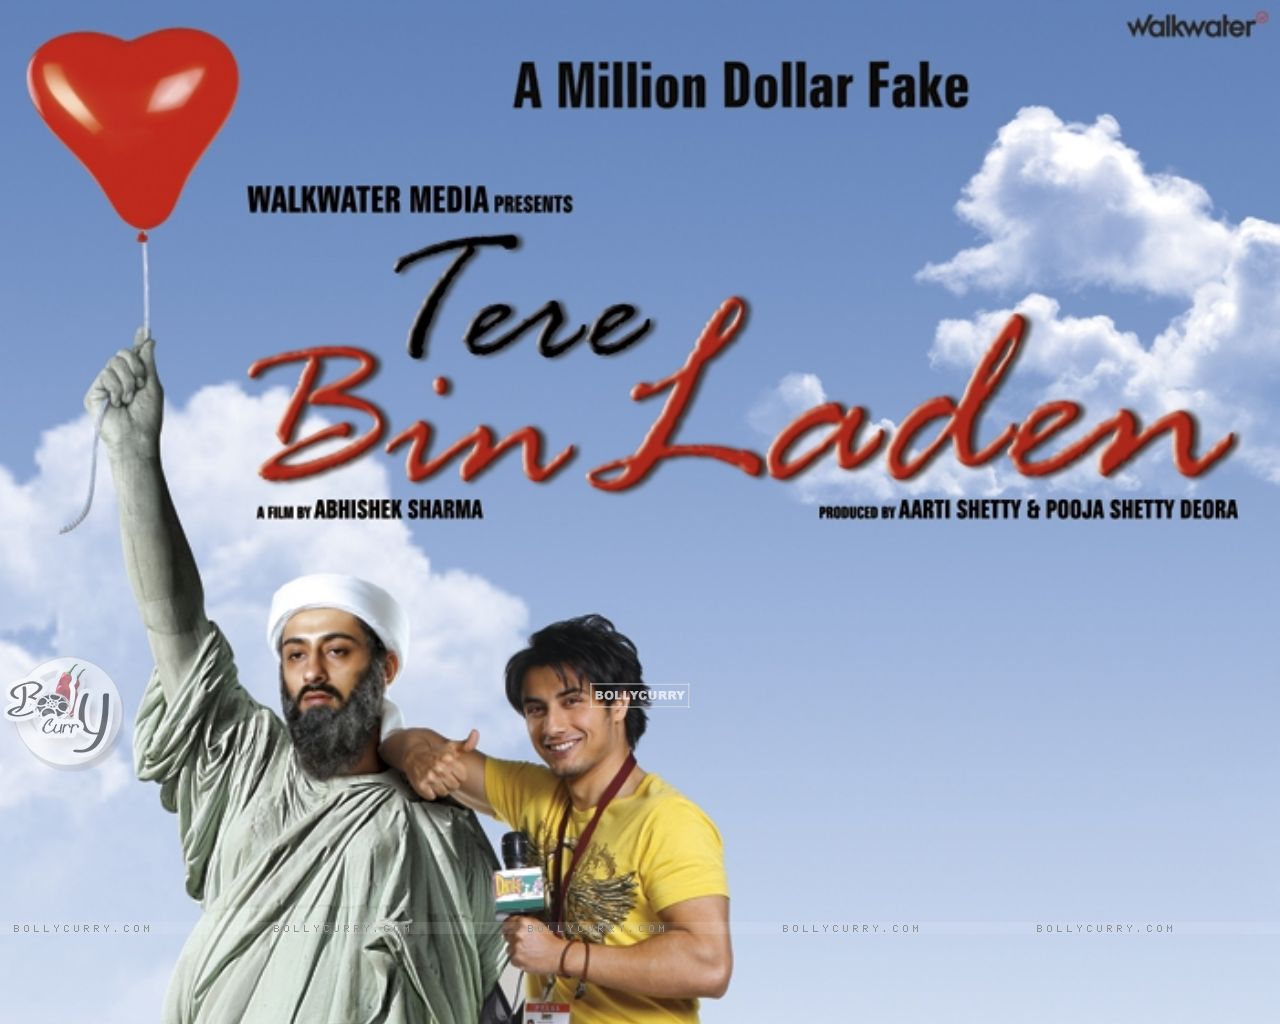 Wallpaper - Poster of the movie Tere Bin Laden (65647) size:1280x1024